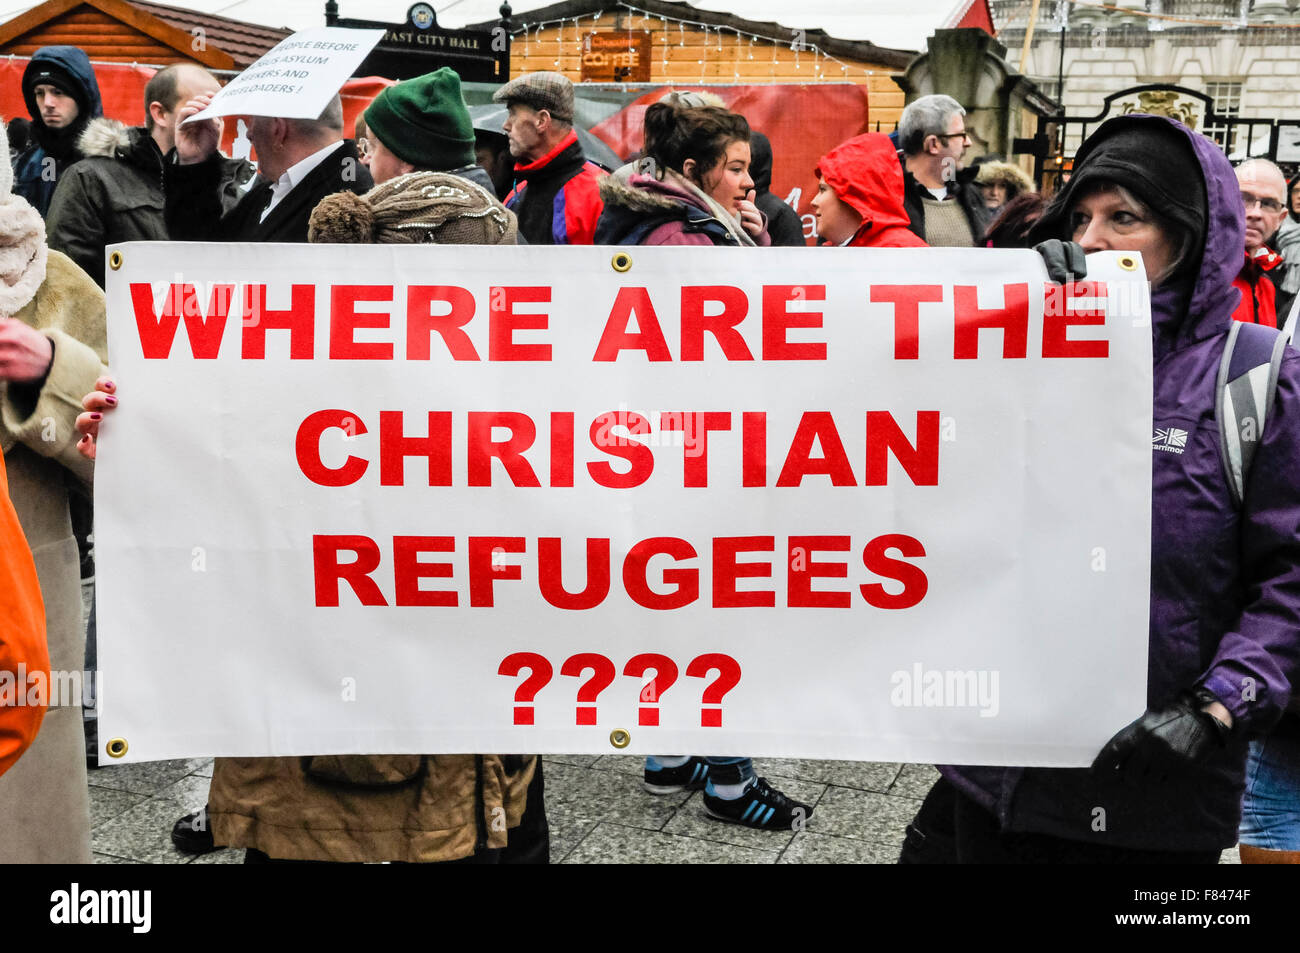 Belfast, Northern Ireland. 05 Dec 2015 - Two women hold up a sign asking 'Where are the Christian Refugees?' as the Protestant Coalition hold a protest against Islamic refugees coming to Northern Ireland. Credit:  Stephen Barnes/Alamy Live News Stock Photo